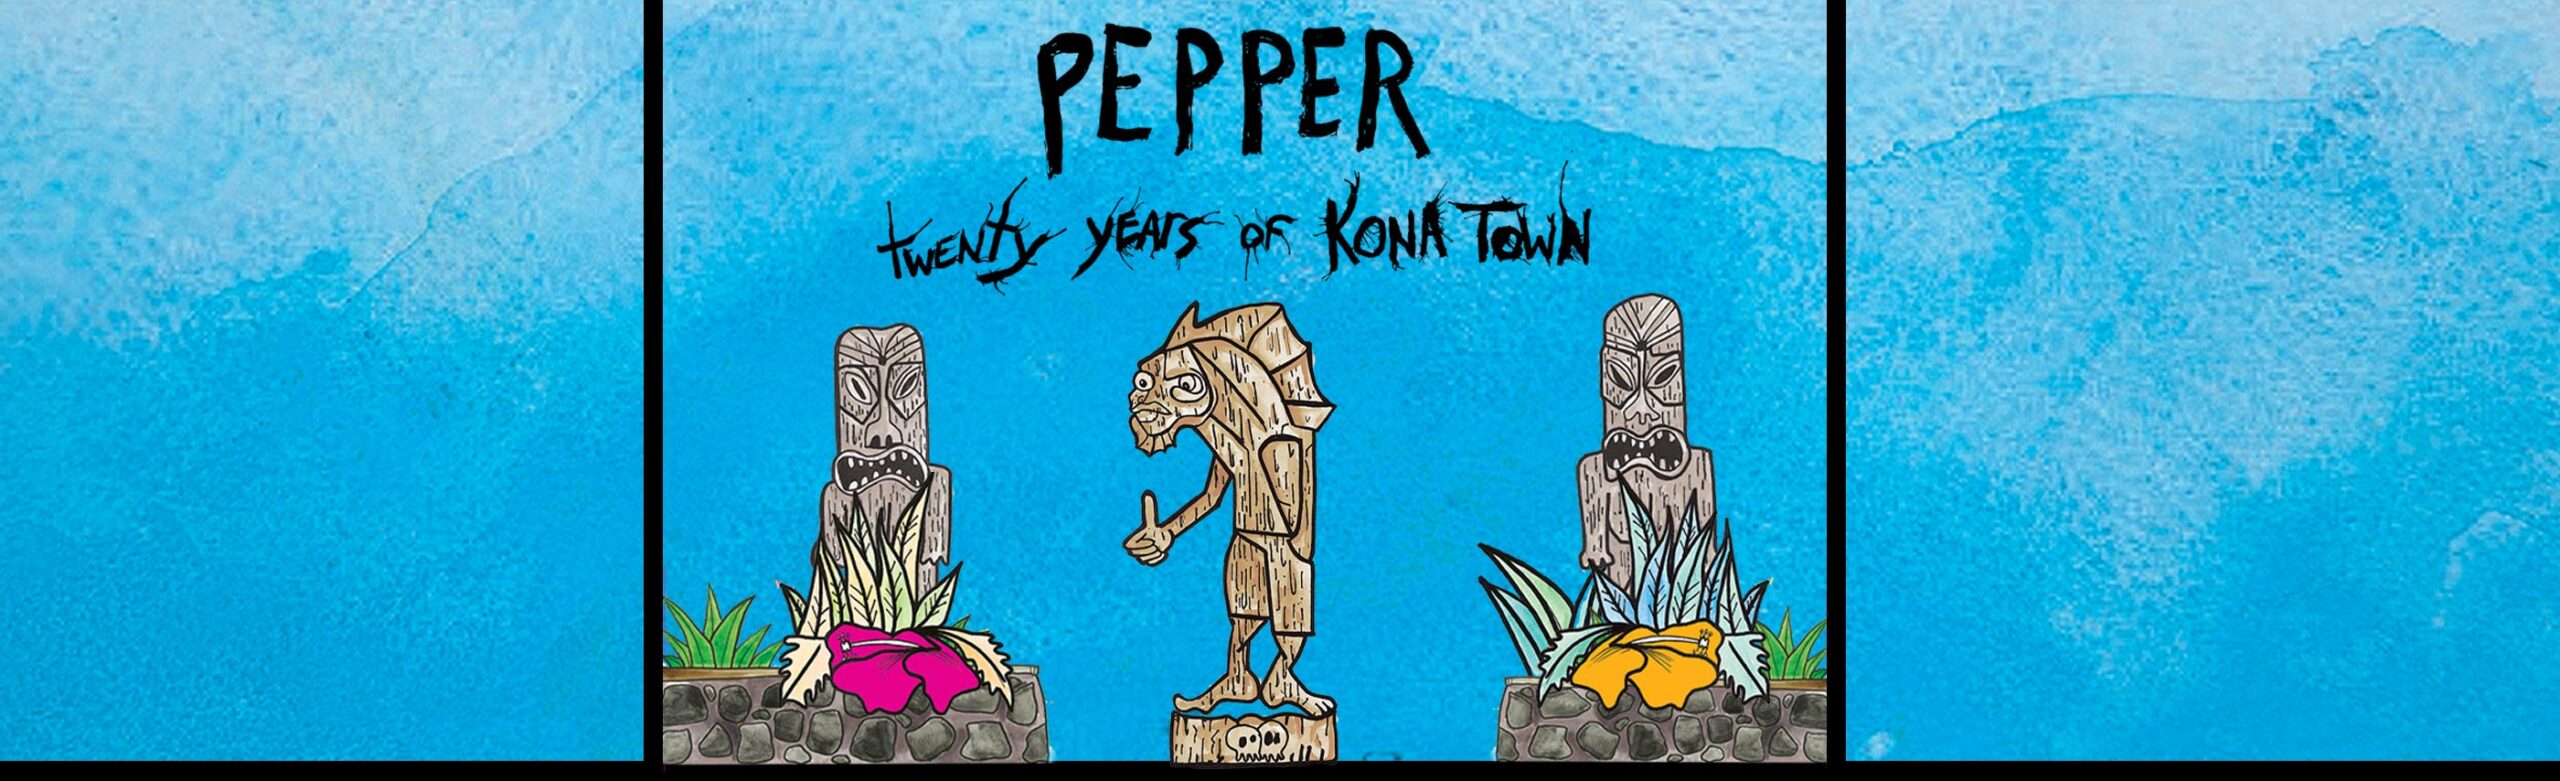 Pepper Announces Twenty Years of “Kona Town” Tour Date at The Wilma Image